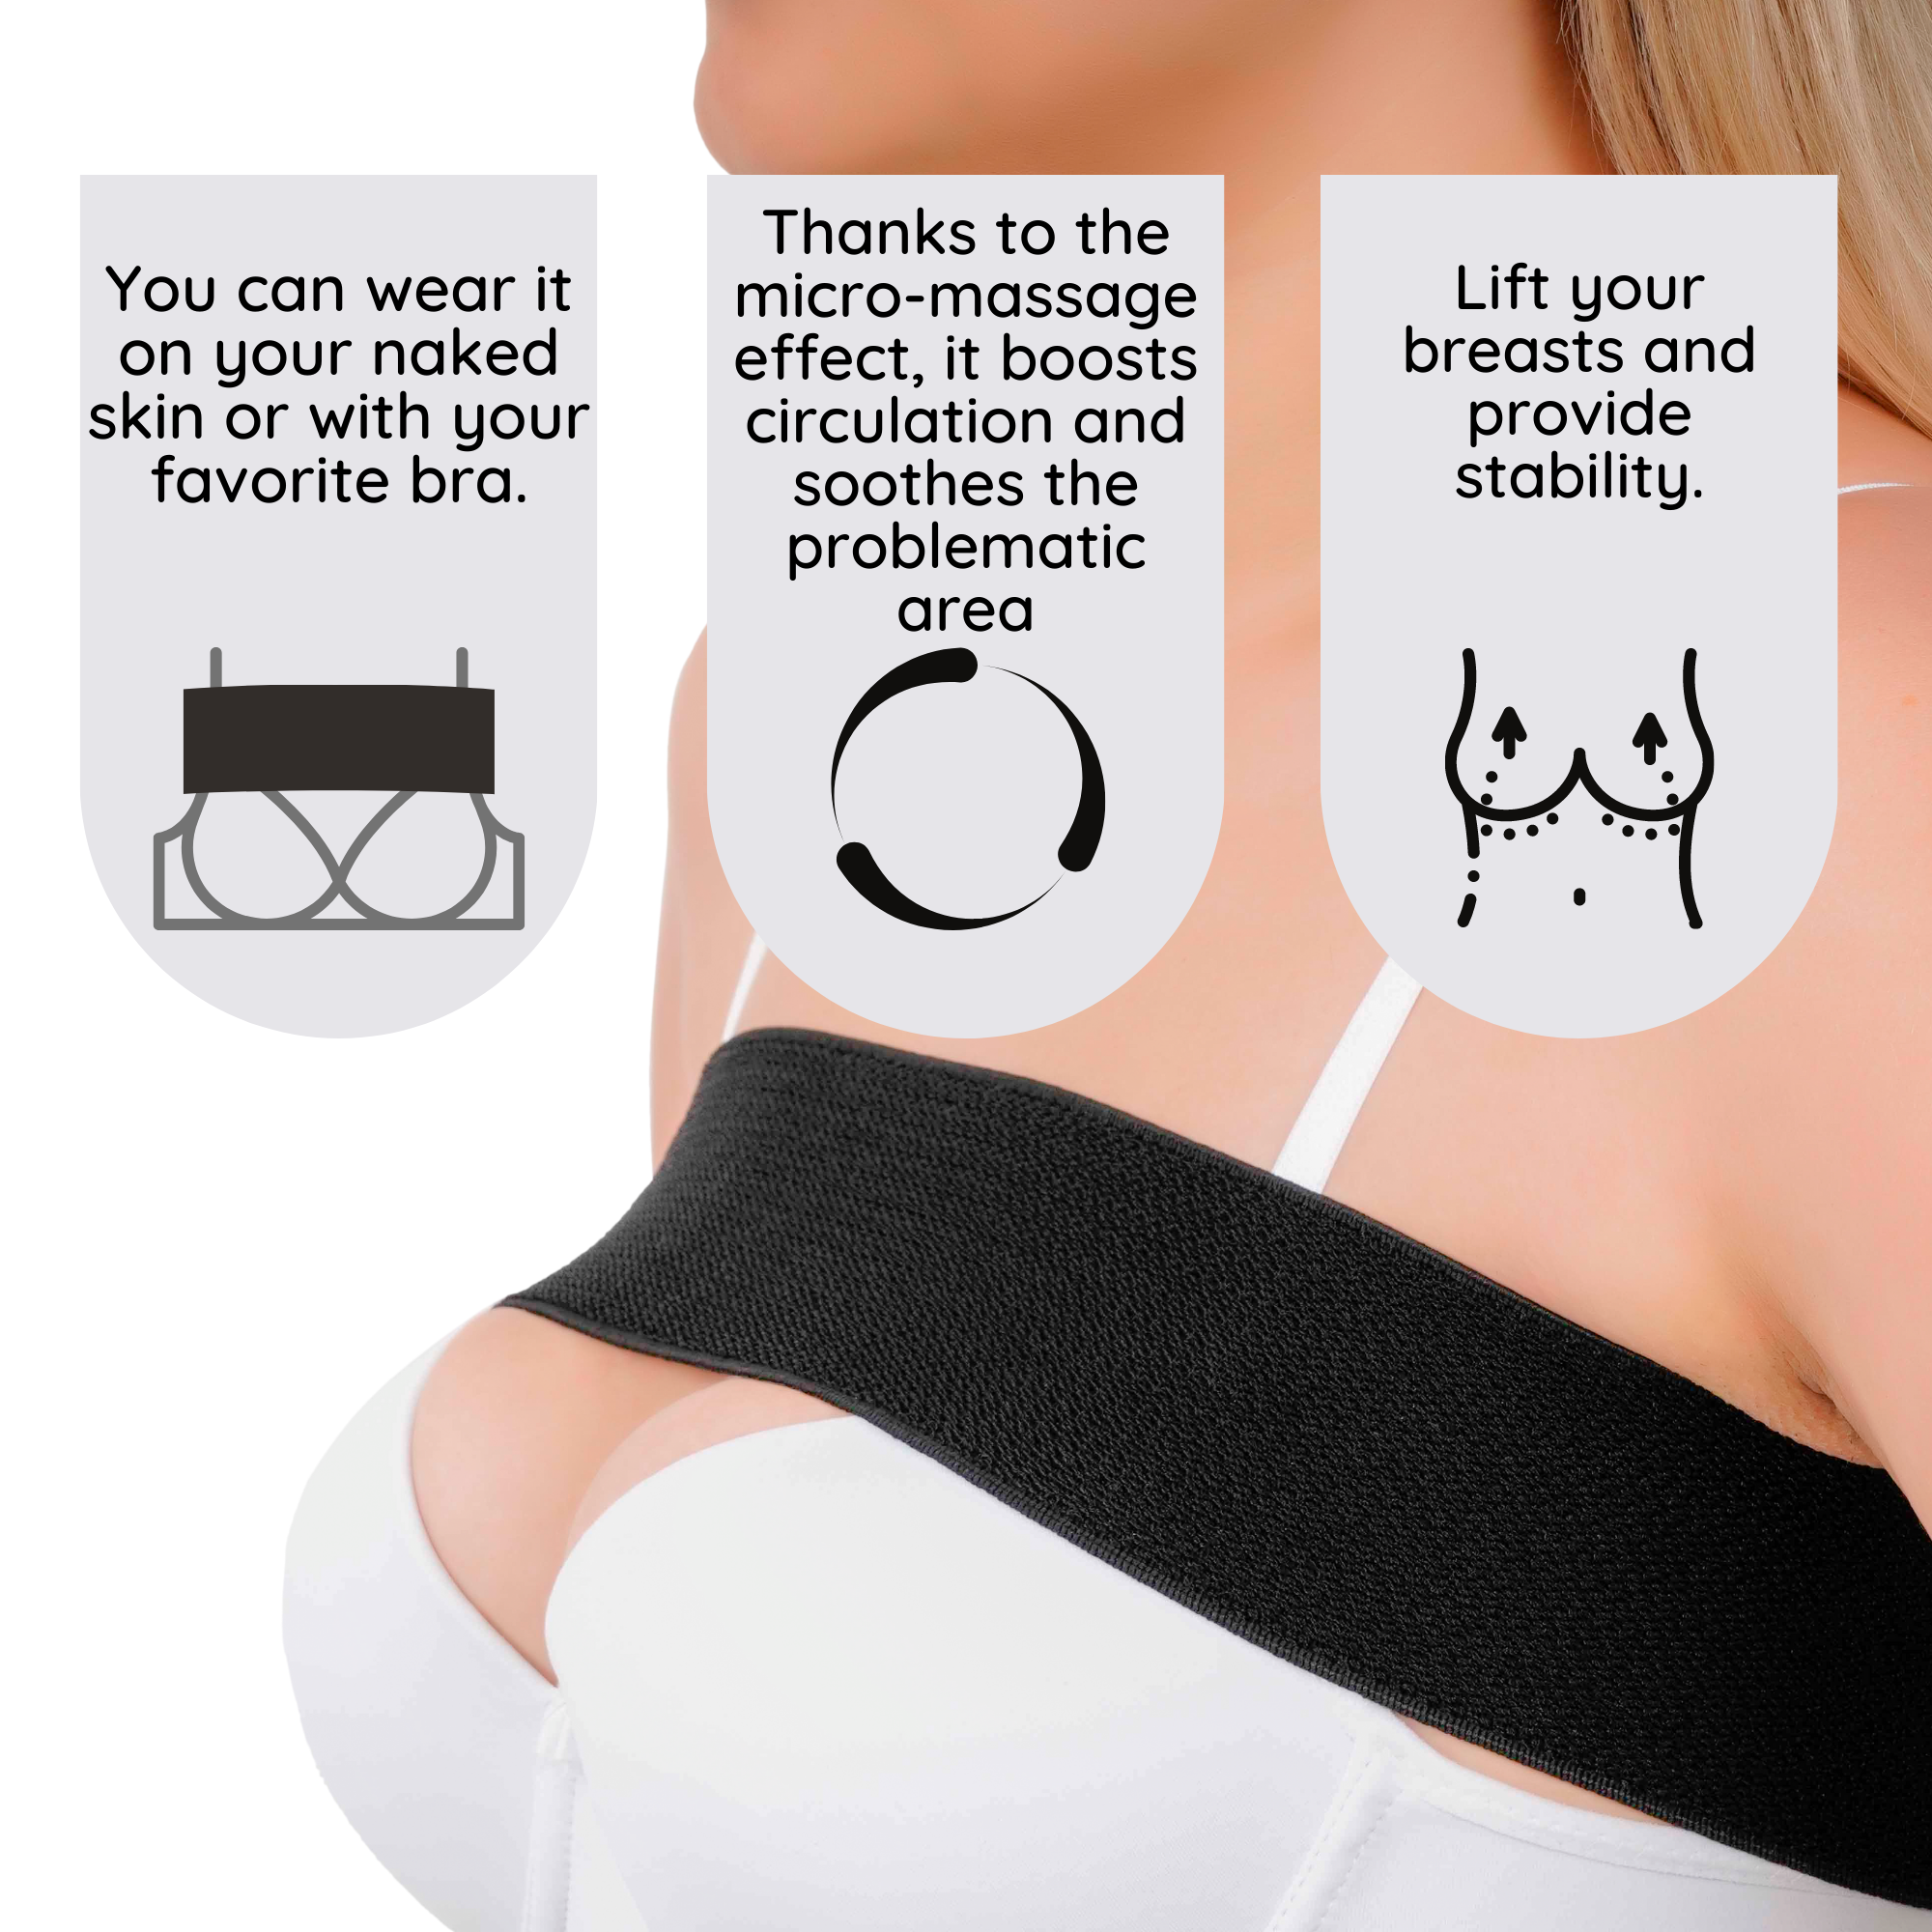 No-Bounce High-Impact Elastic Breast Support Band use for Breast